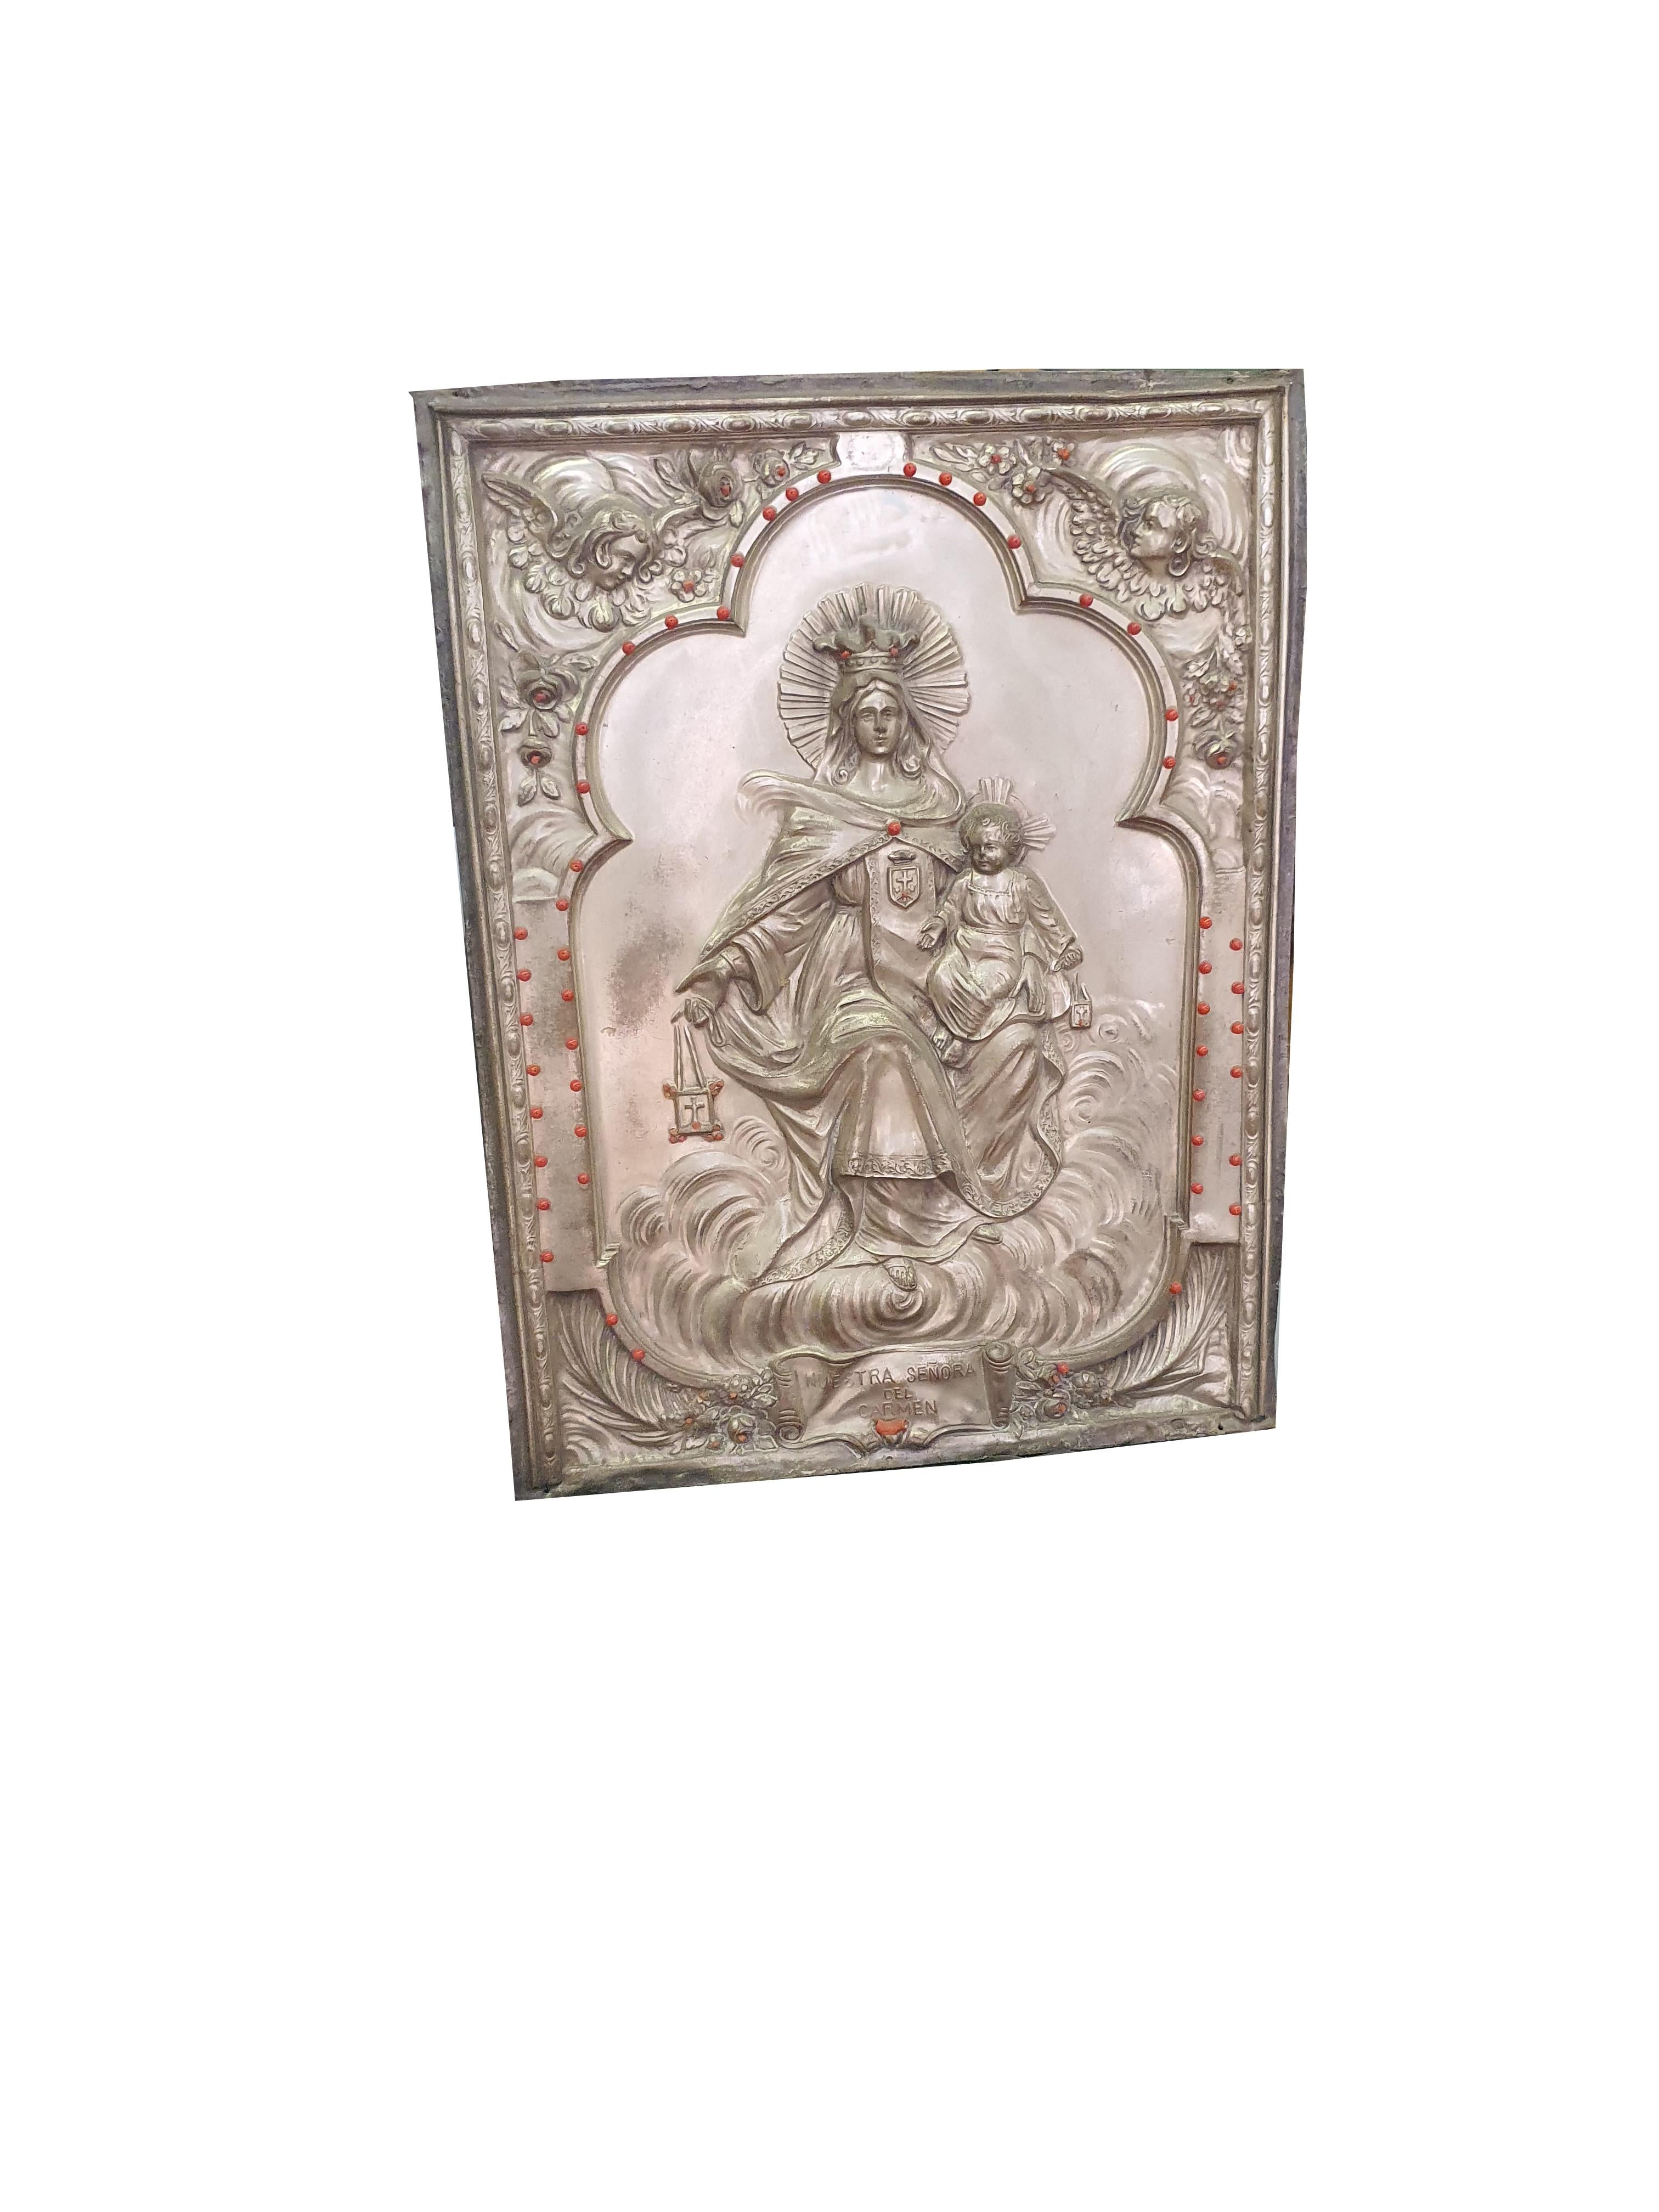 Particular plaque made of silver-plated copper, depicting the Madonna del Carmine, with inserts in Trapani coral. Below we find the words 